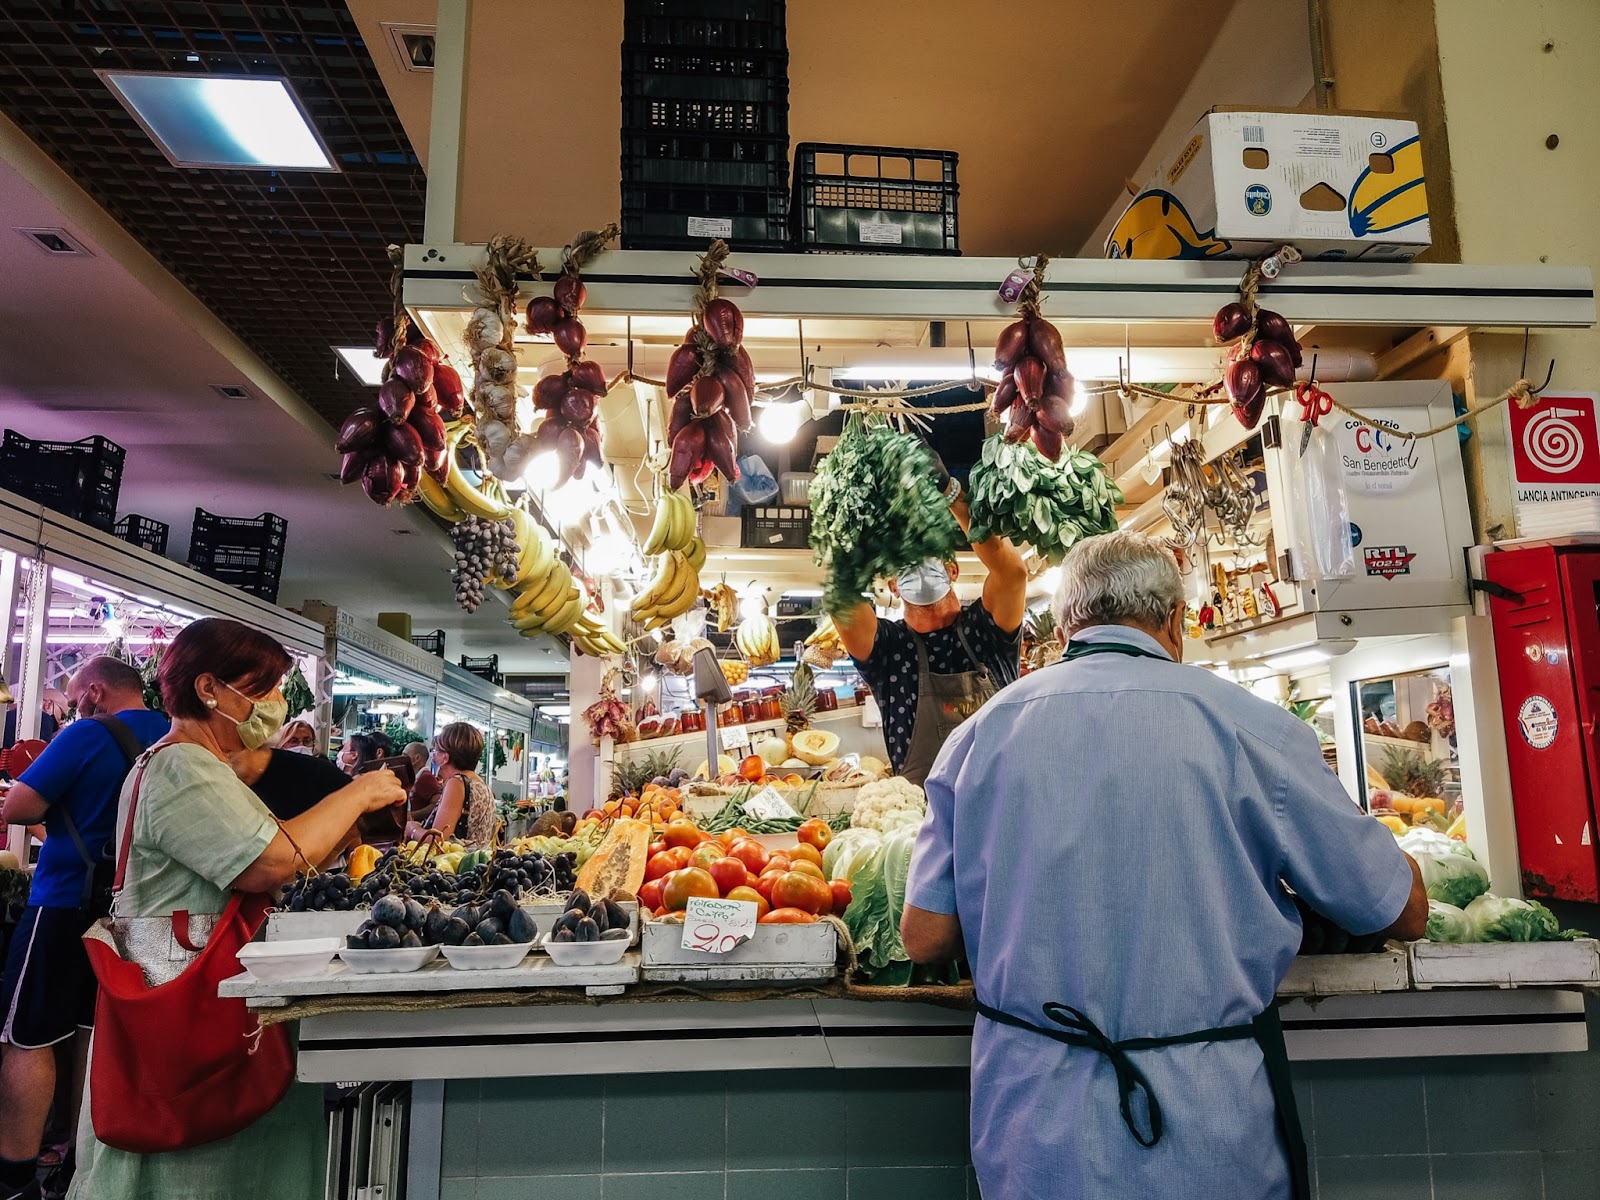 Food market in Italy